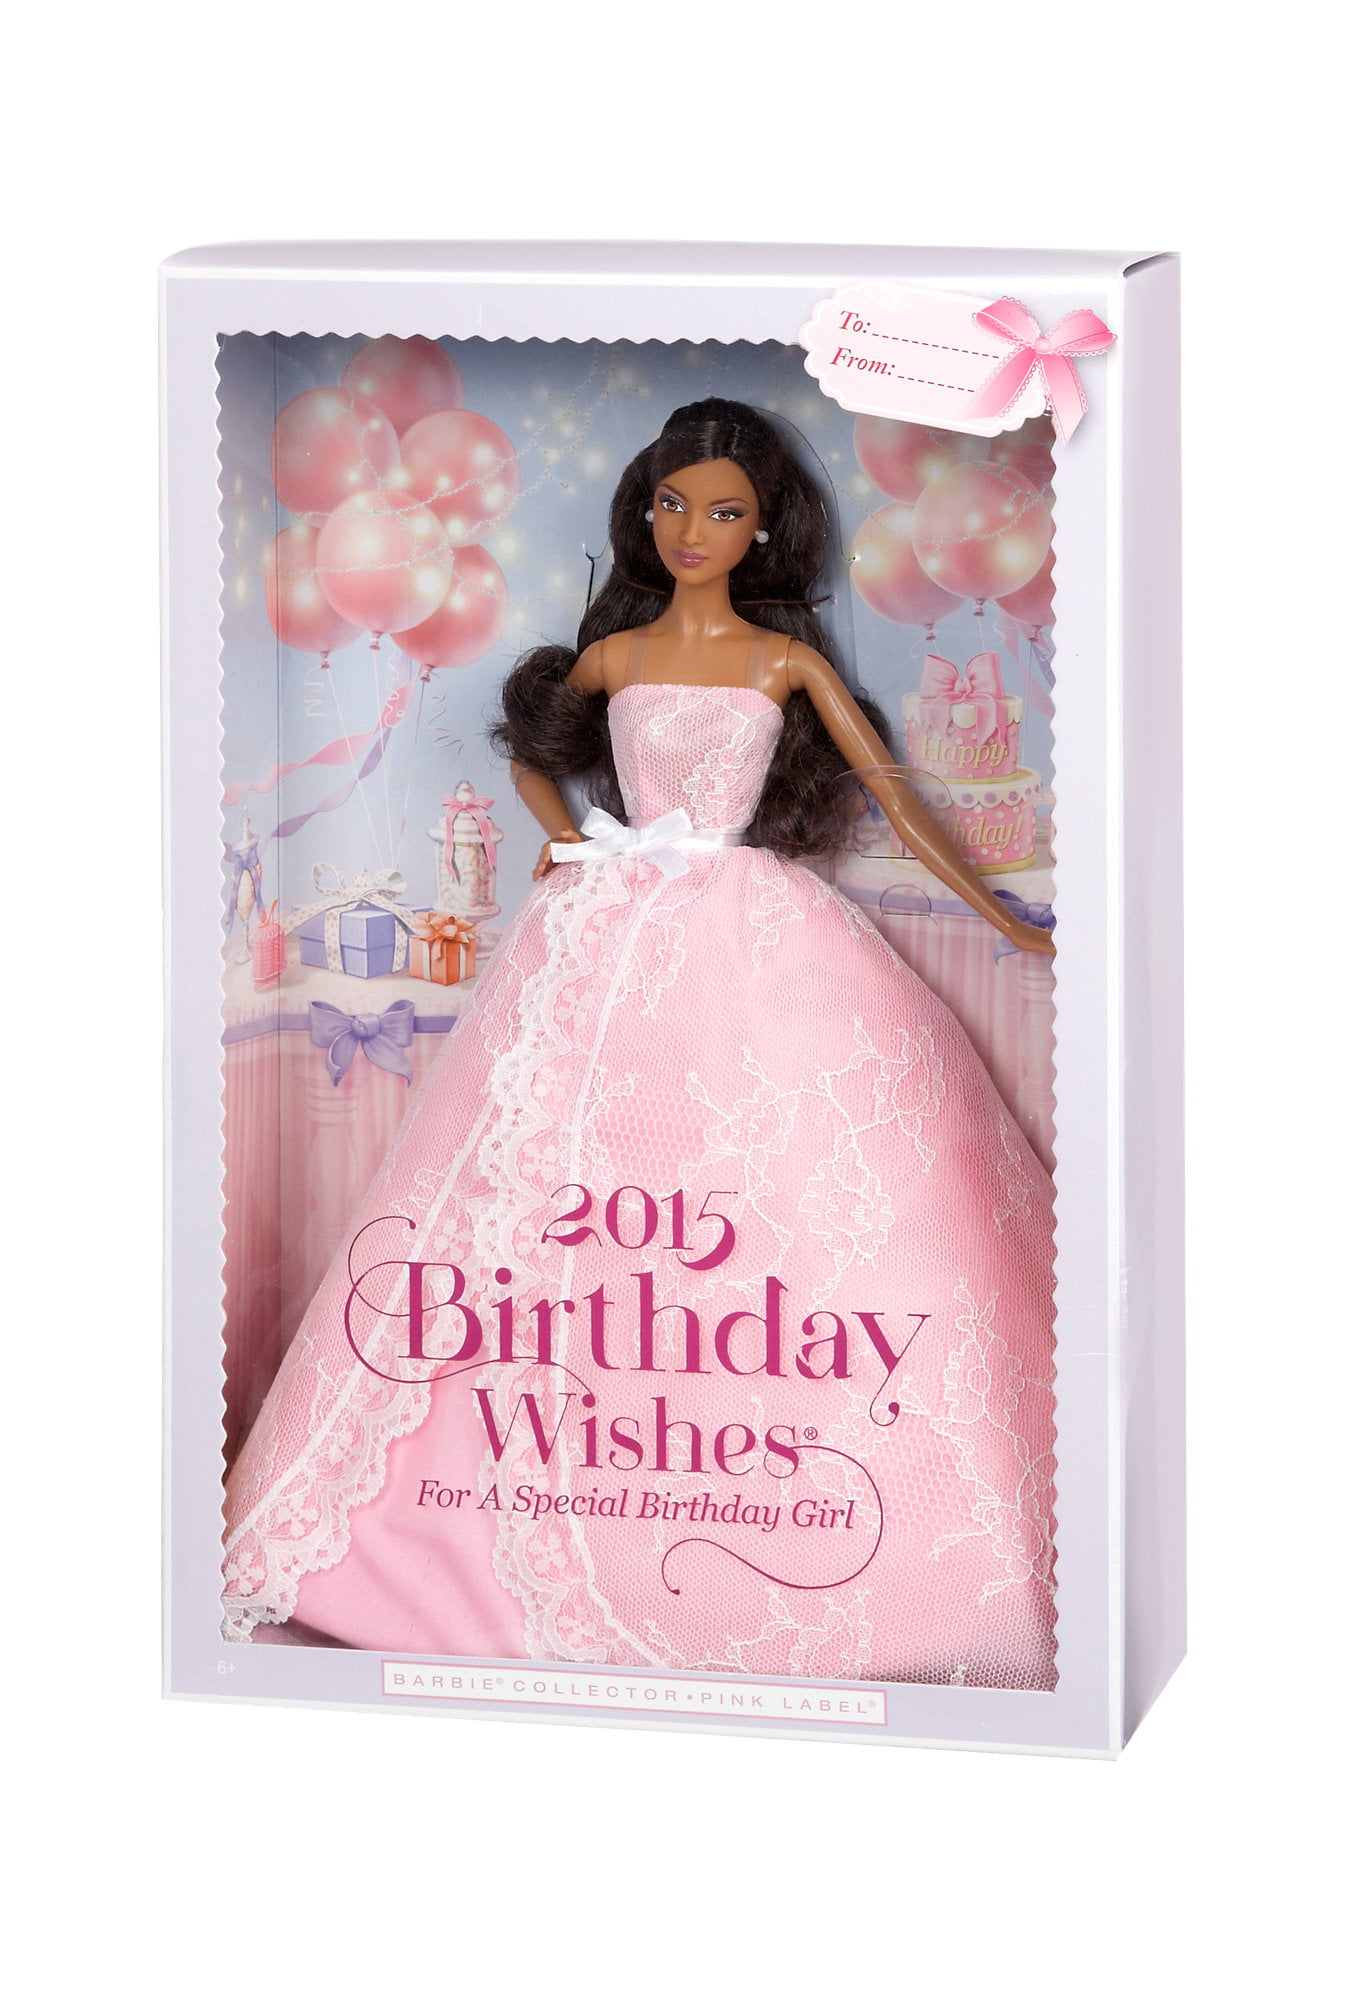 zout compact gloeilamp 2015 Birthday Wishes Barbie Doll, Brown Hair - Walmart.com